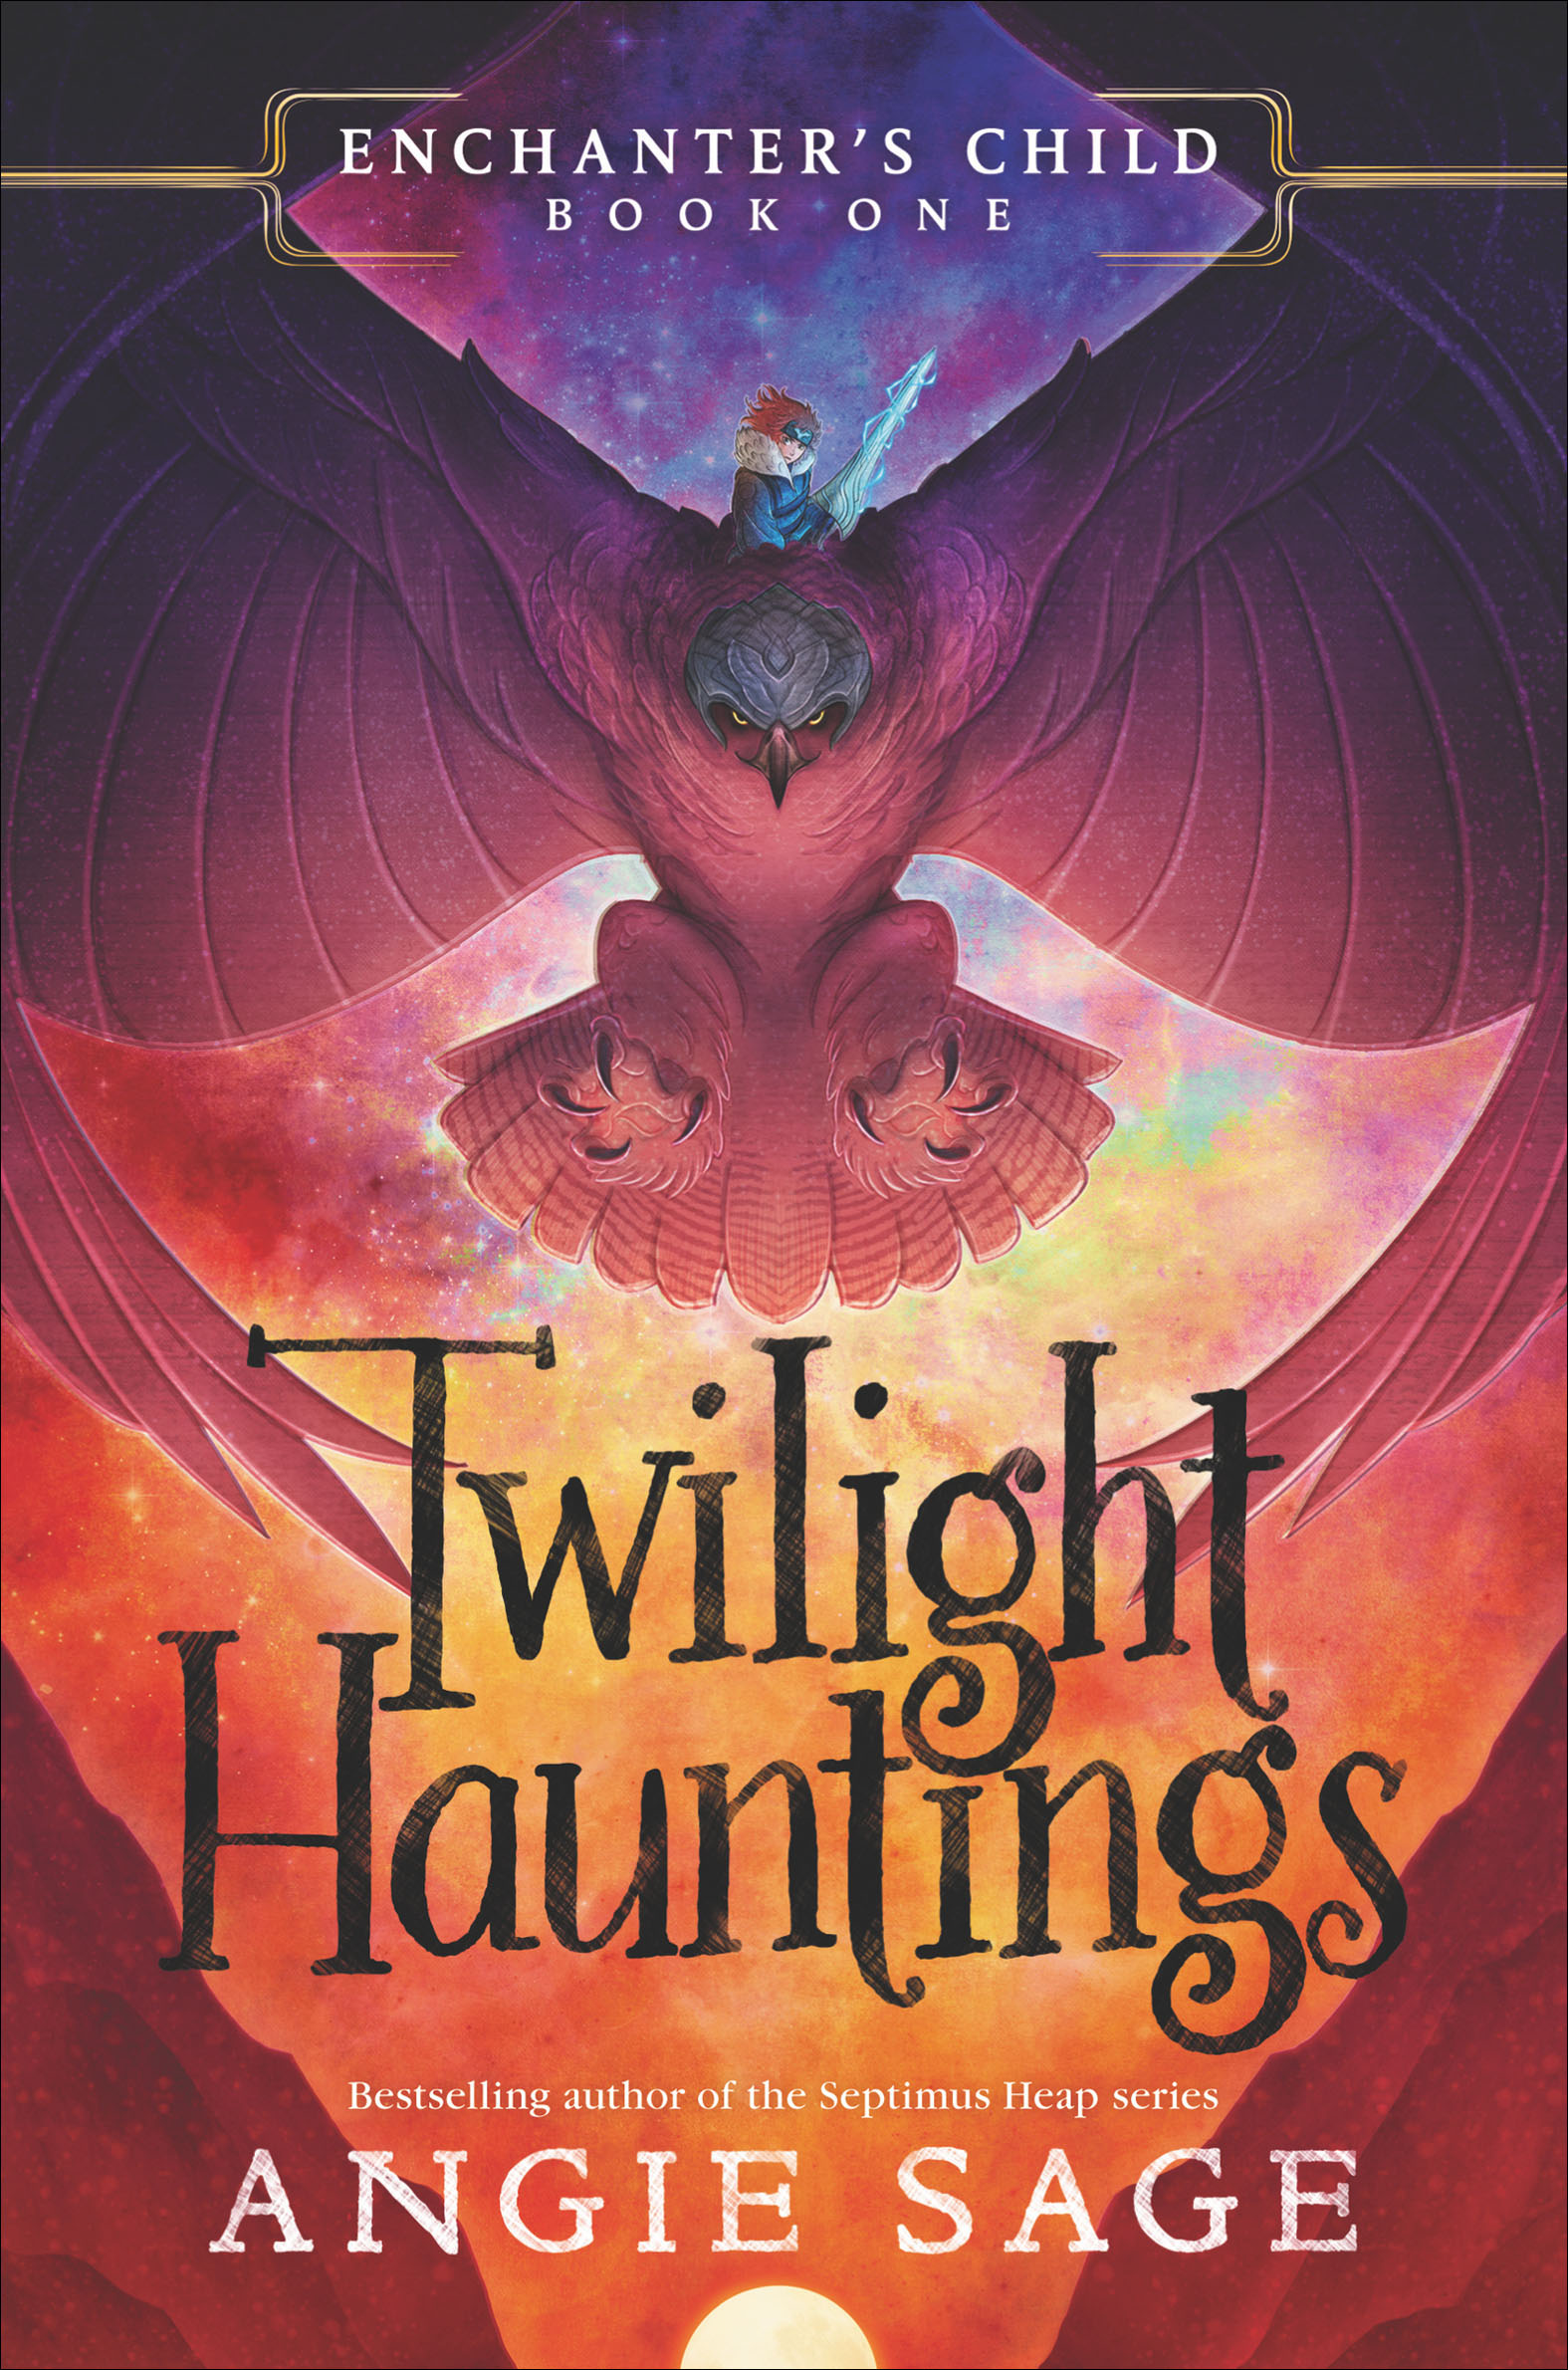 Enchanter's Child, Book One: Twilight Hauntings cover image